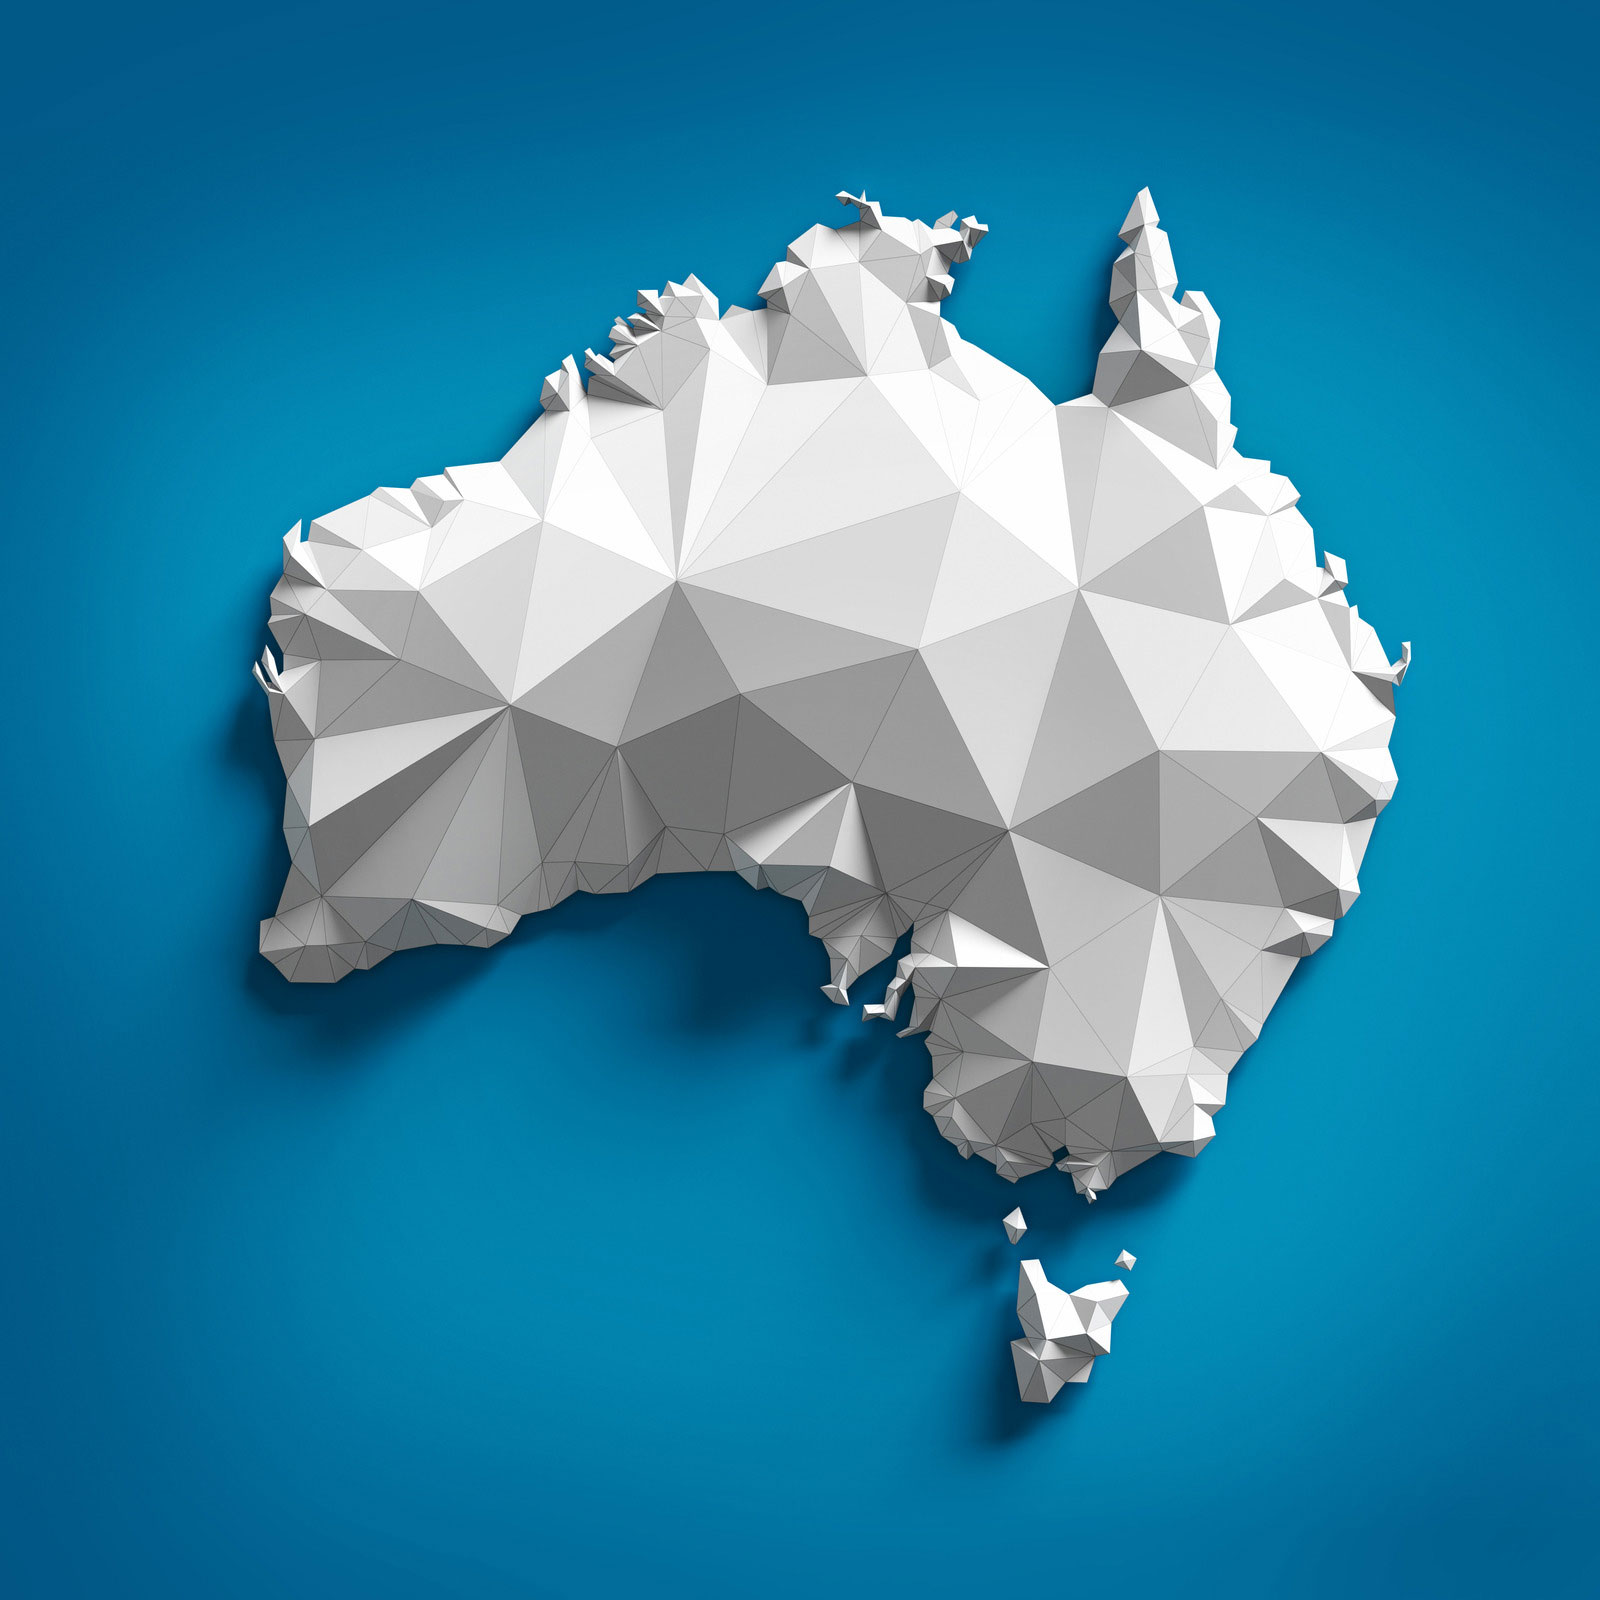 Outline of Australia made out of paper